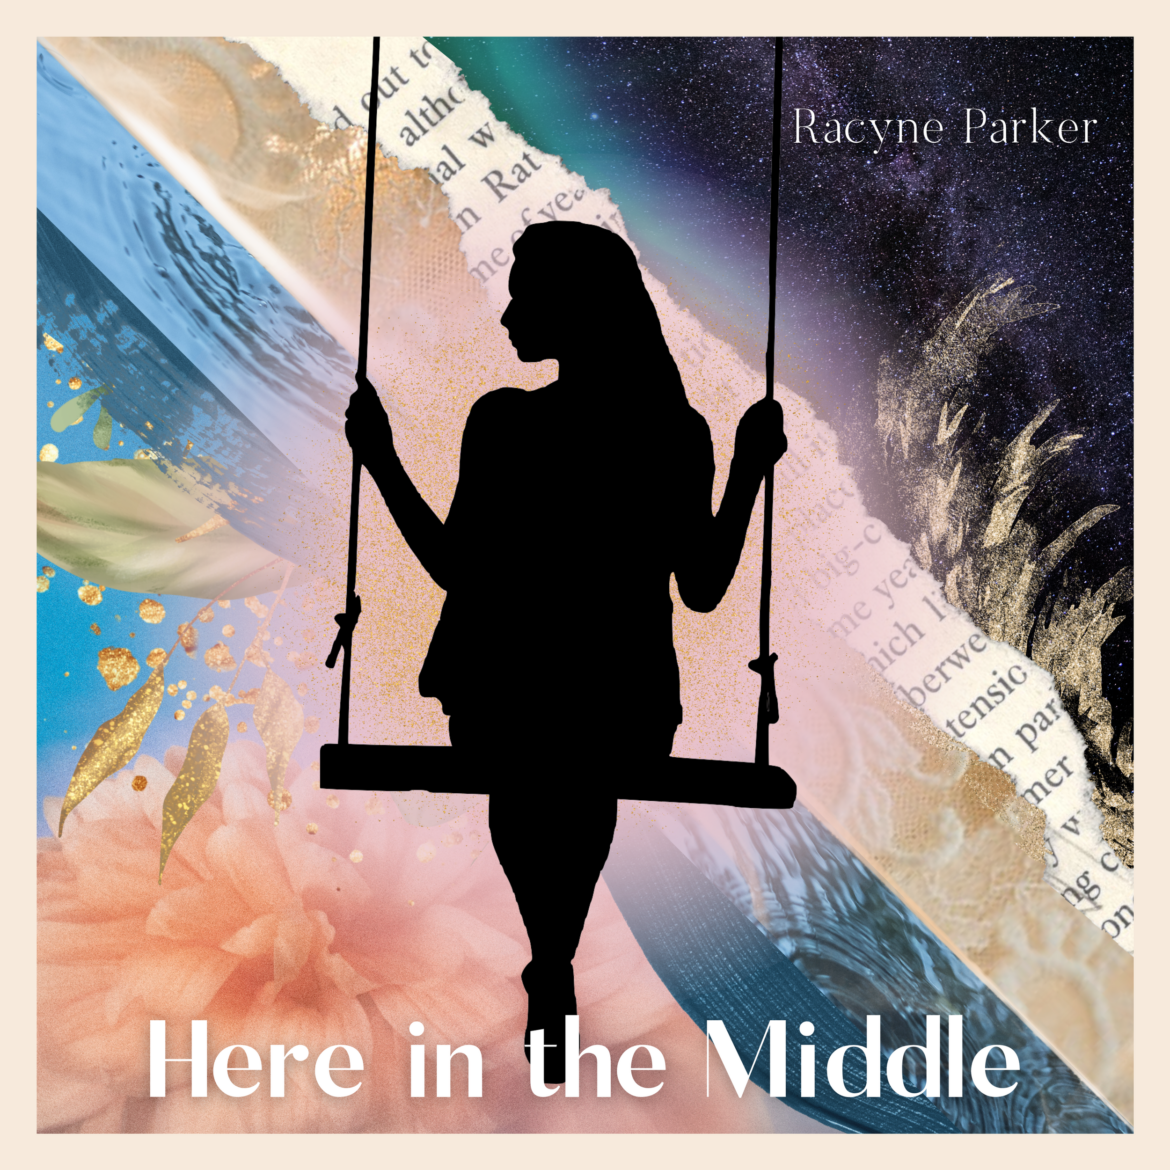 Racyne Parker’s “Here in the Middle” Conquers Overthinking with Decisiveness